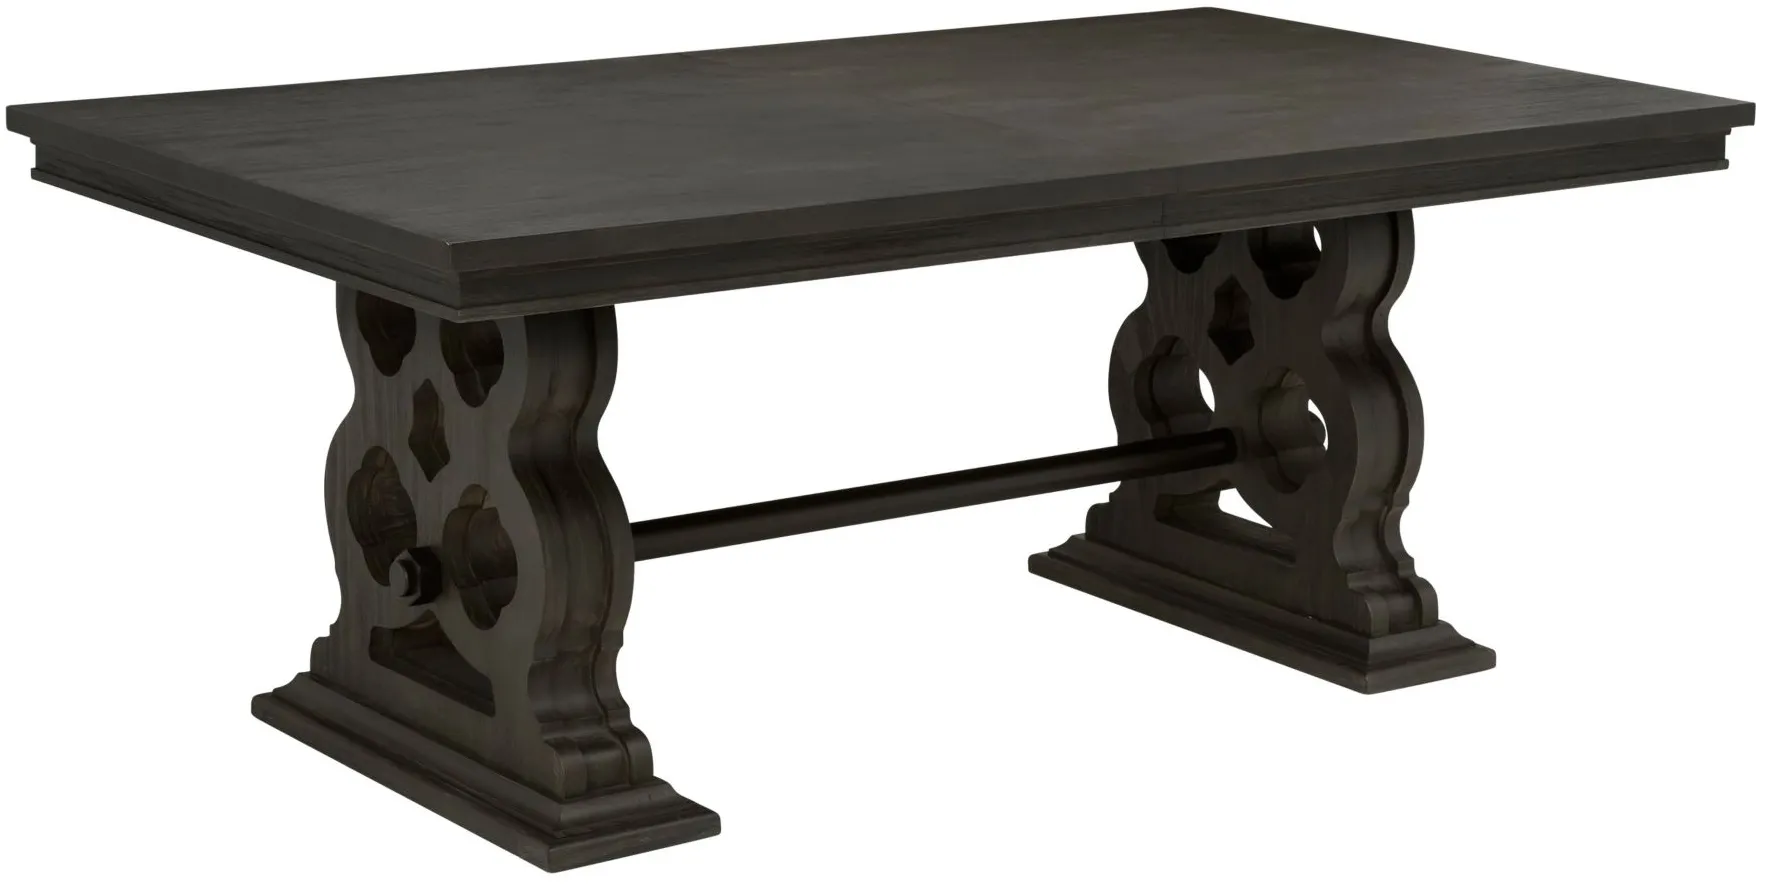 Belmore Dining Table w/Leaf in Espresso by Homelegance